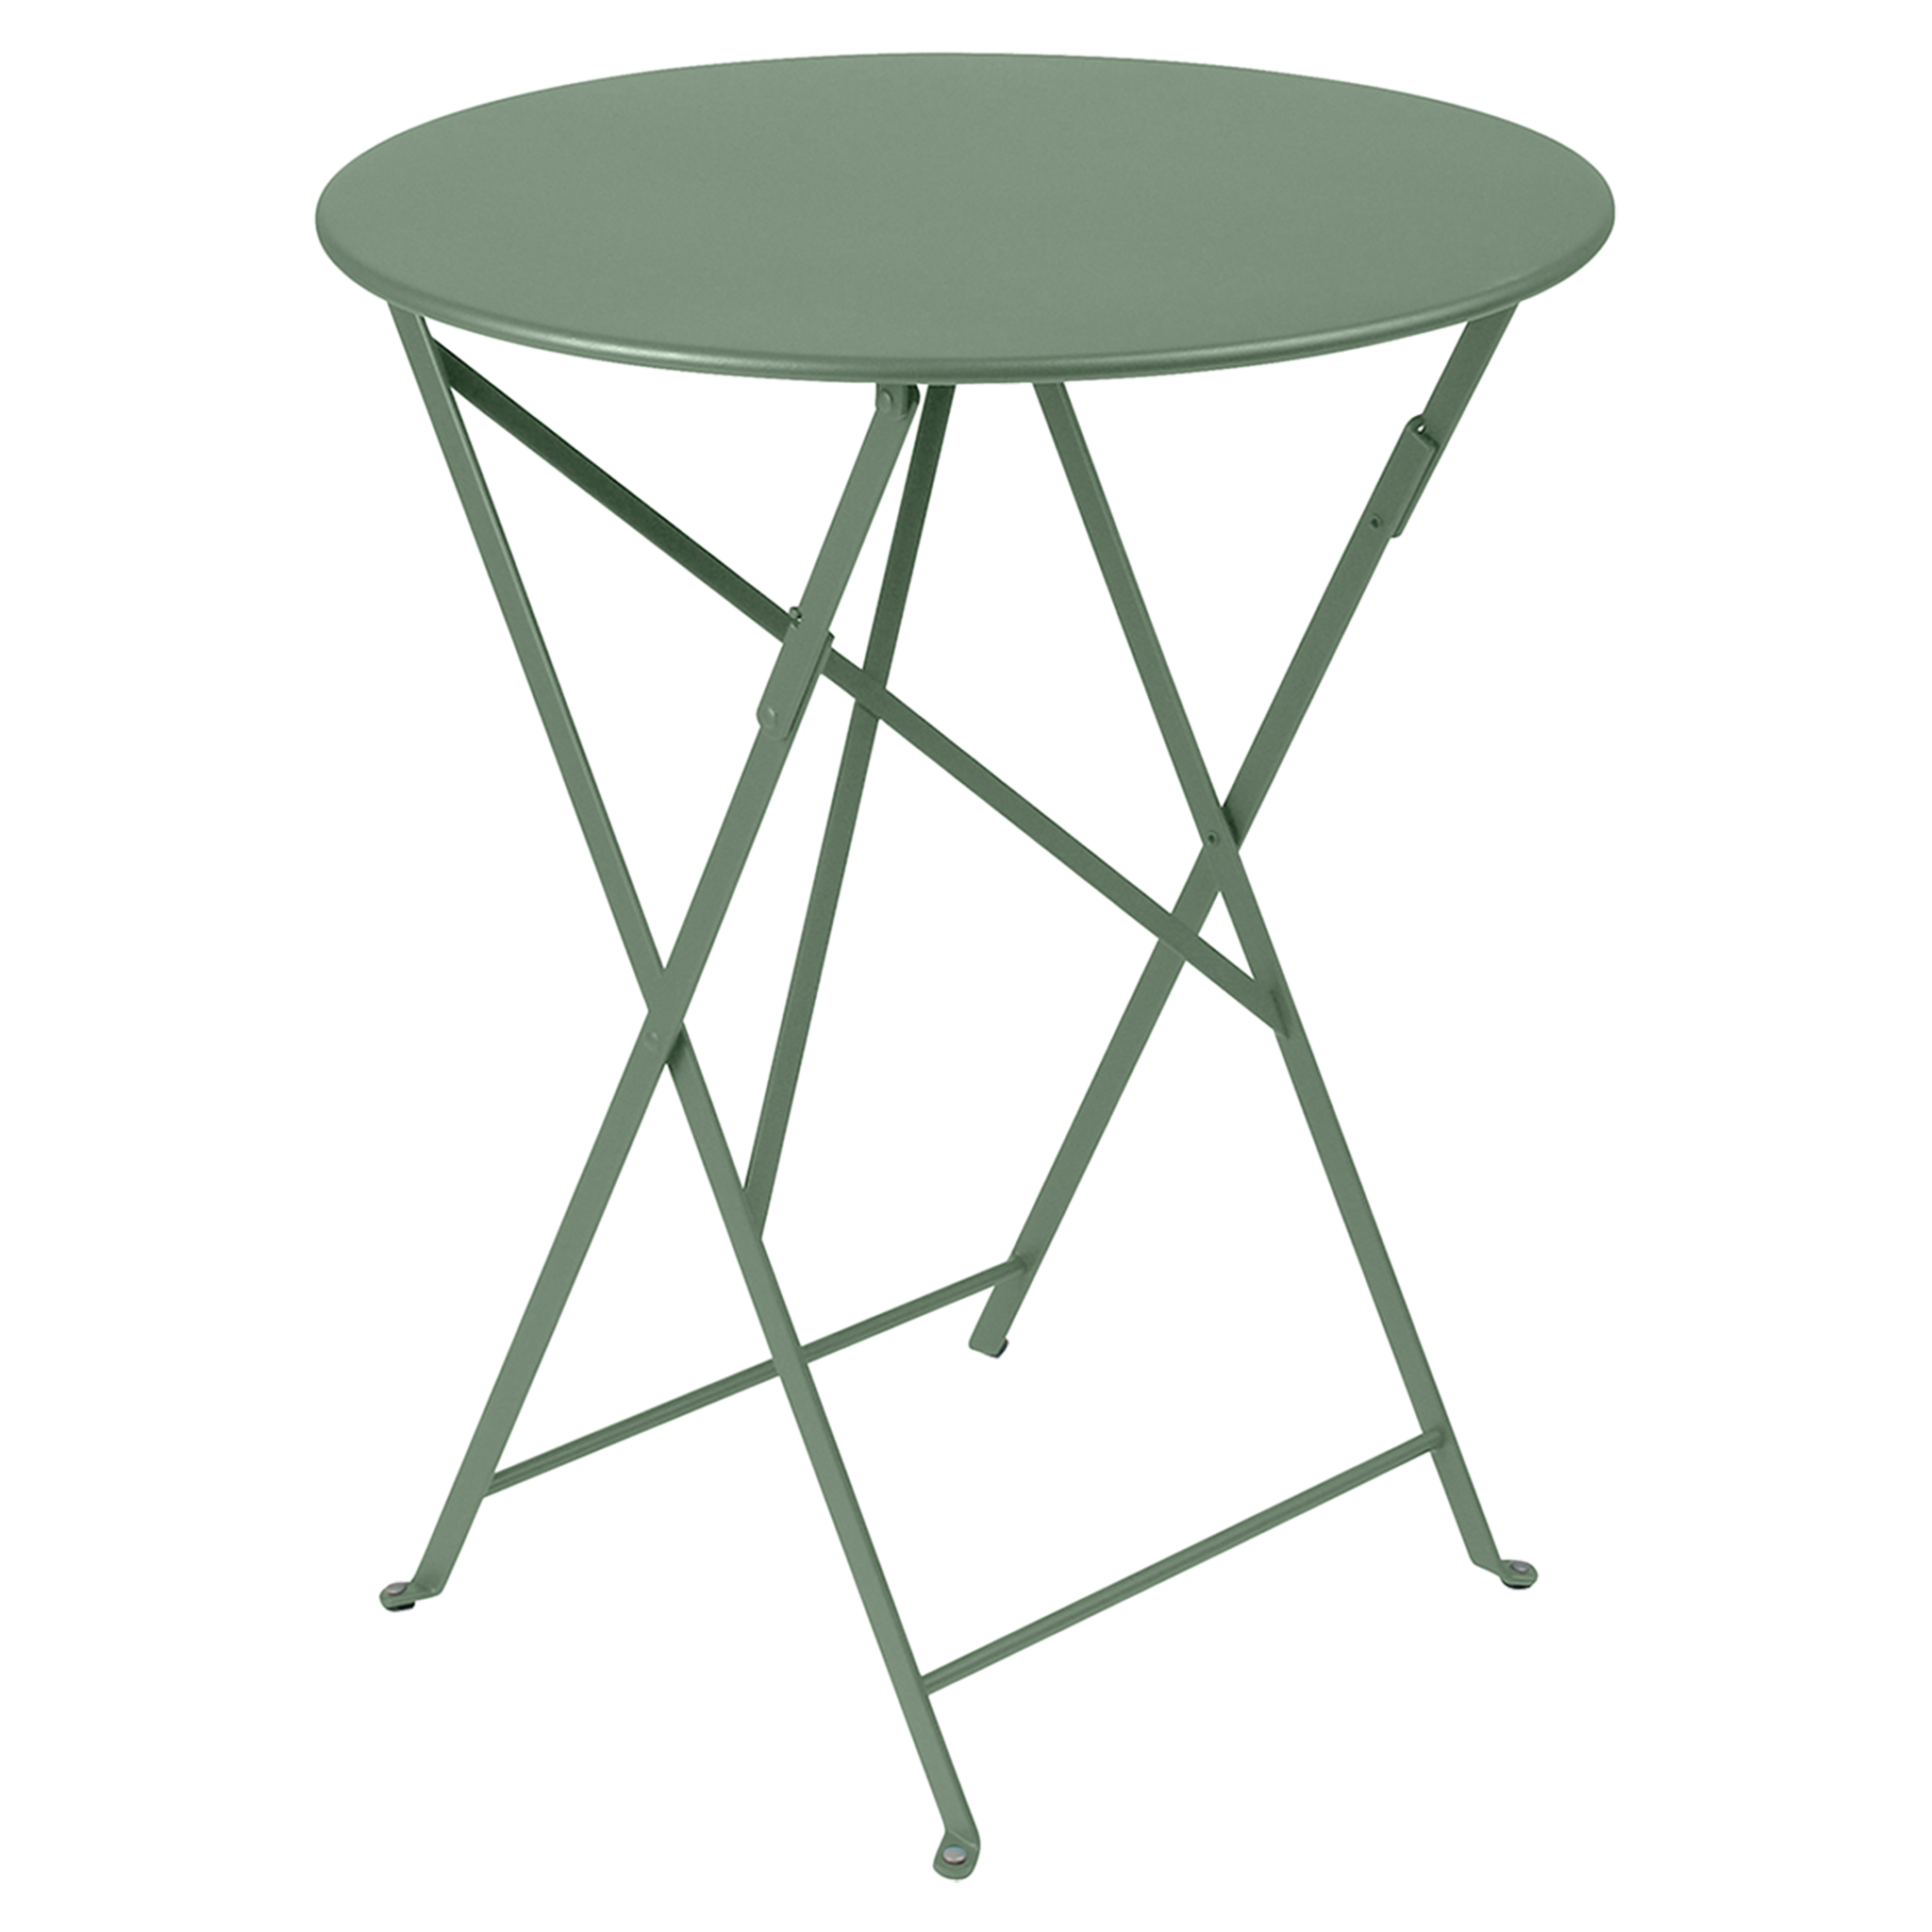 Bistro Round Folding Table by Fermob